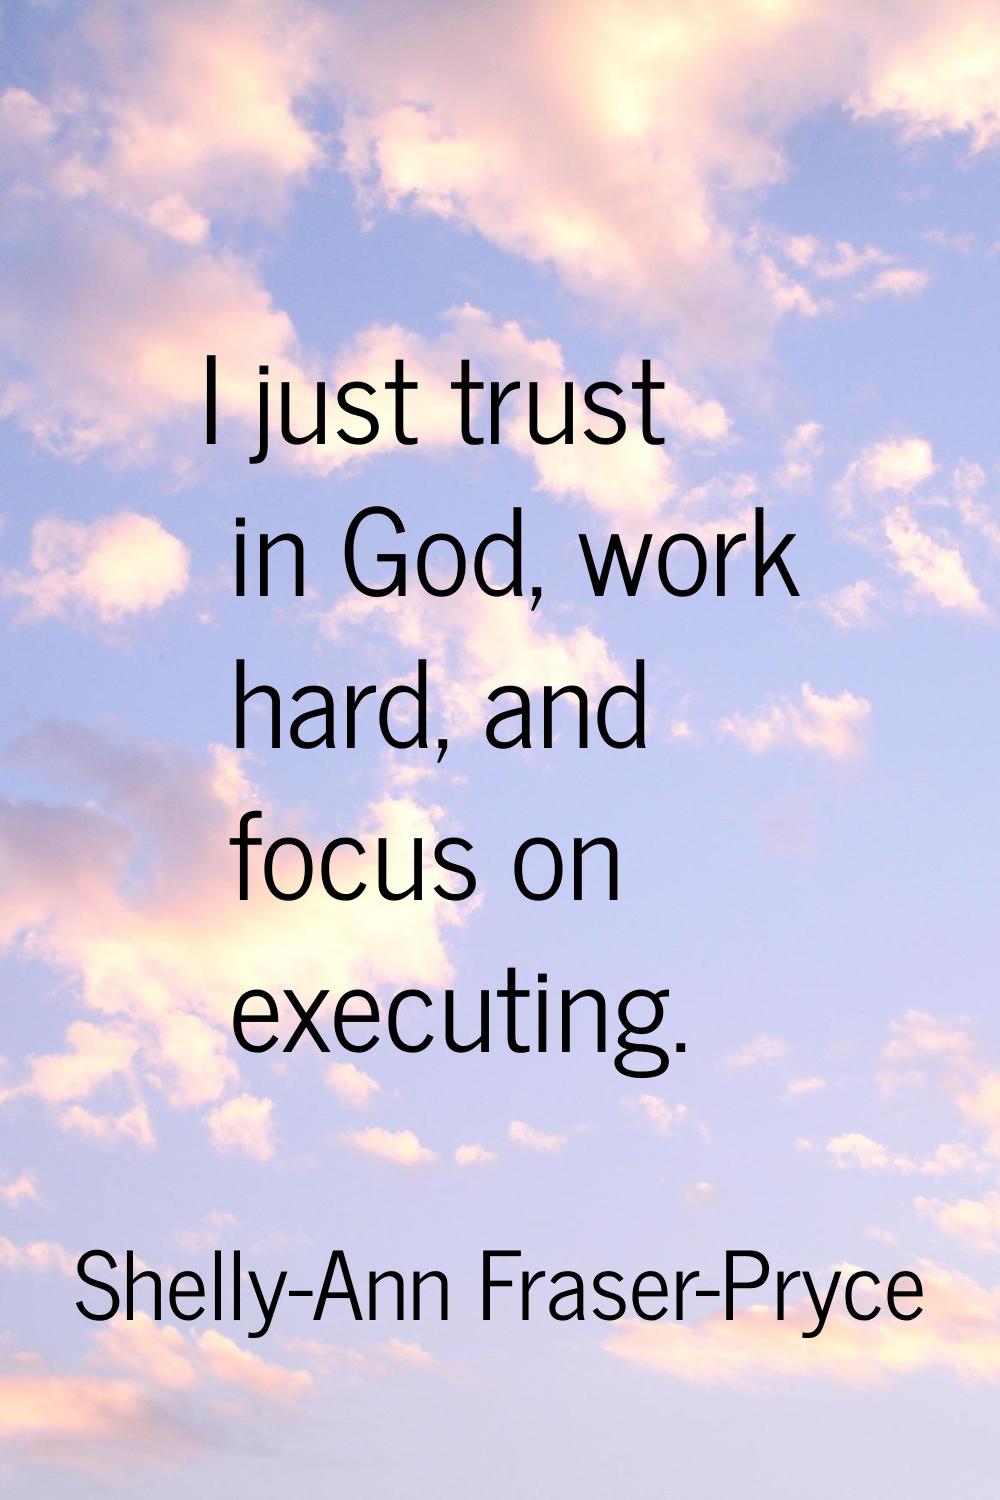 I just trust in God, work hard, and focus on executing.